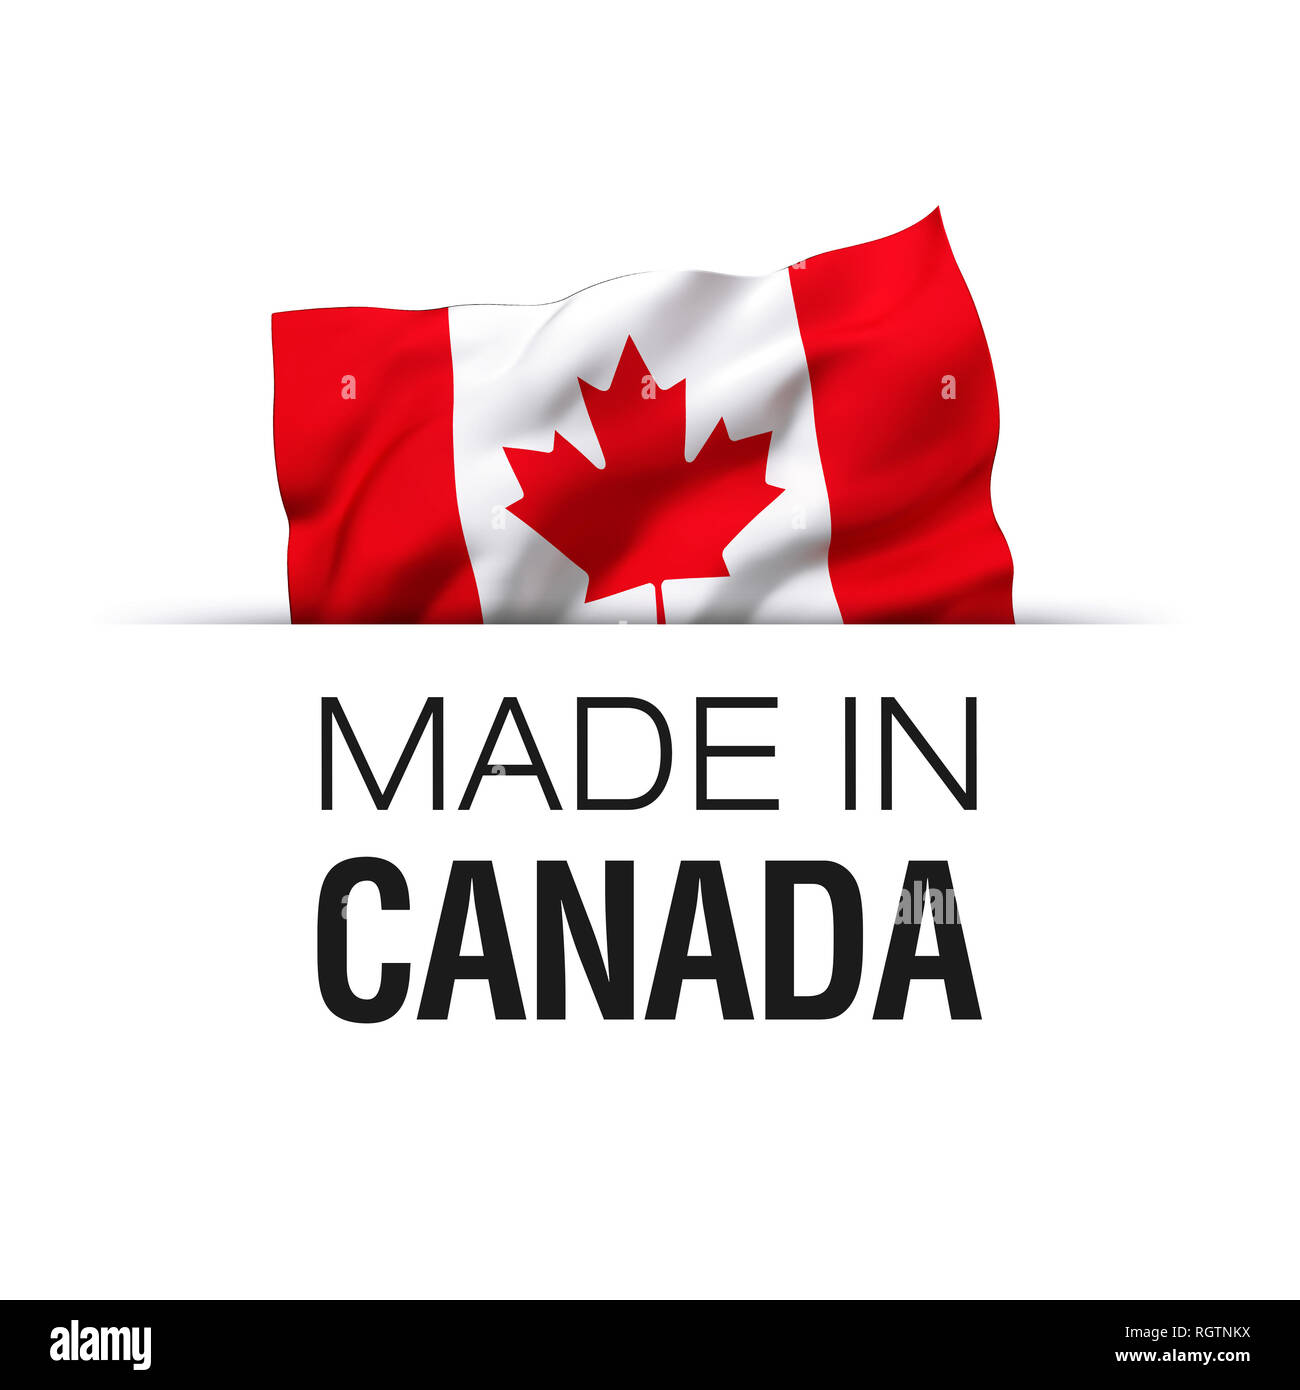 Made in Canada - Guarantee label with a waving Canadian flag. Stock Photo